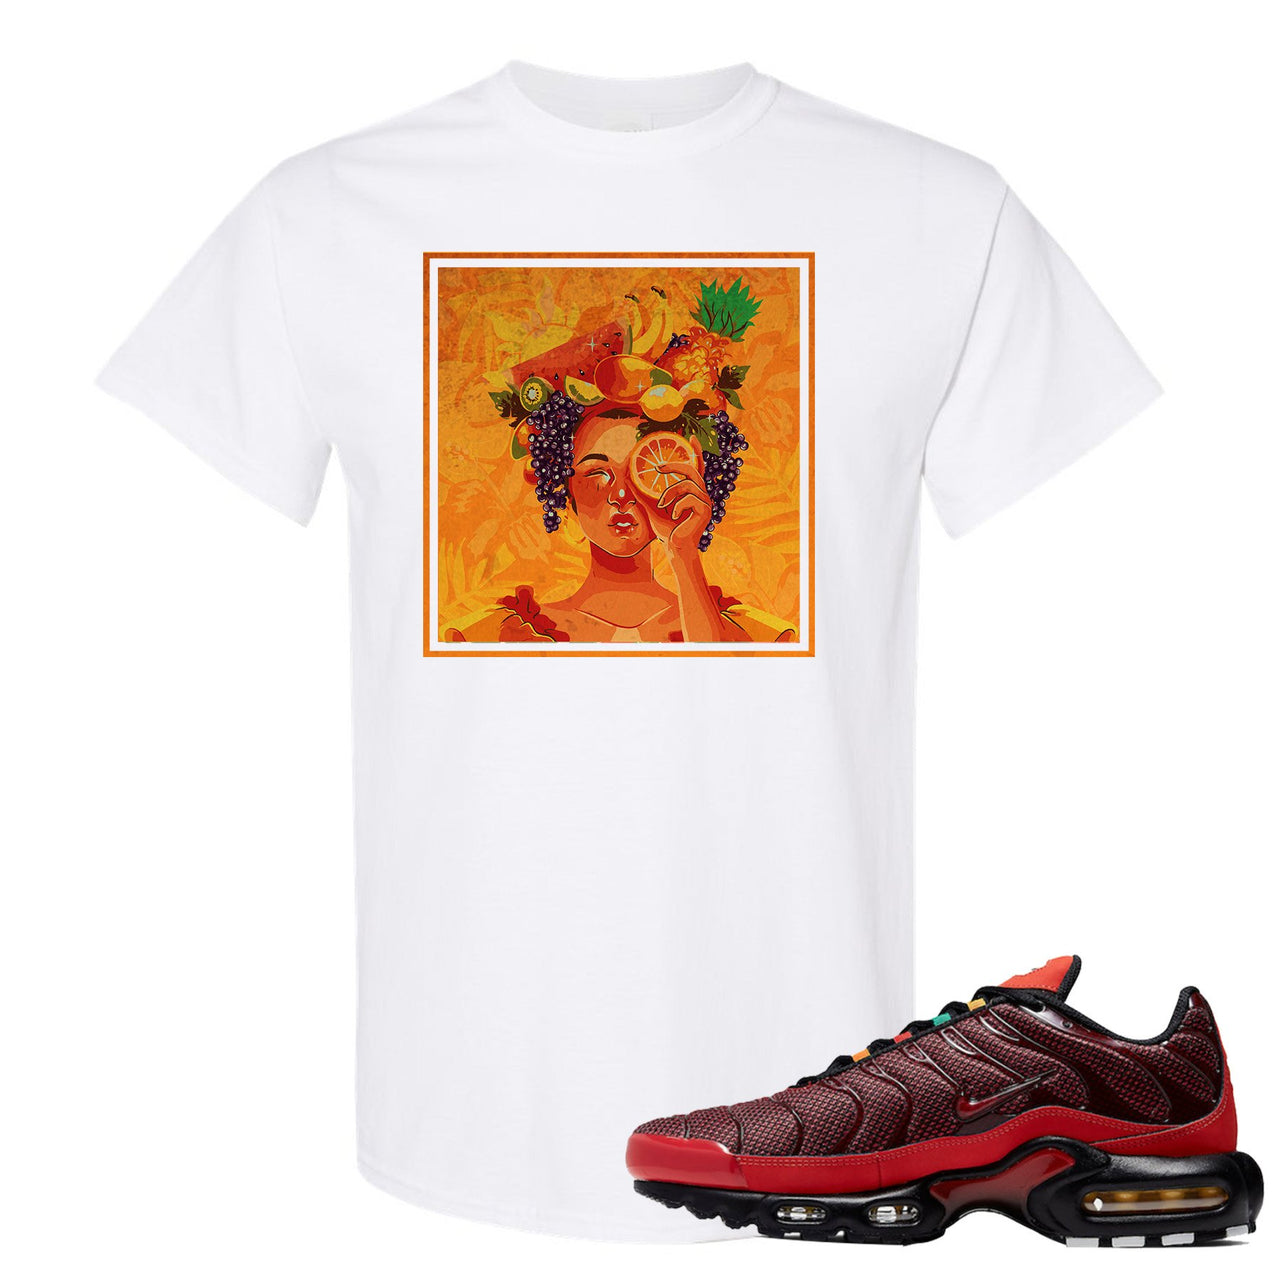 printed on the front of the air max plus sunburst sneaker matching white tee shirt is the lady fruit logo